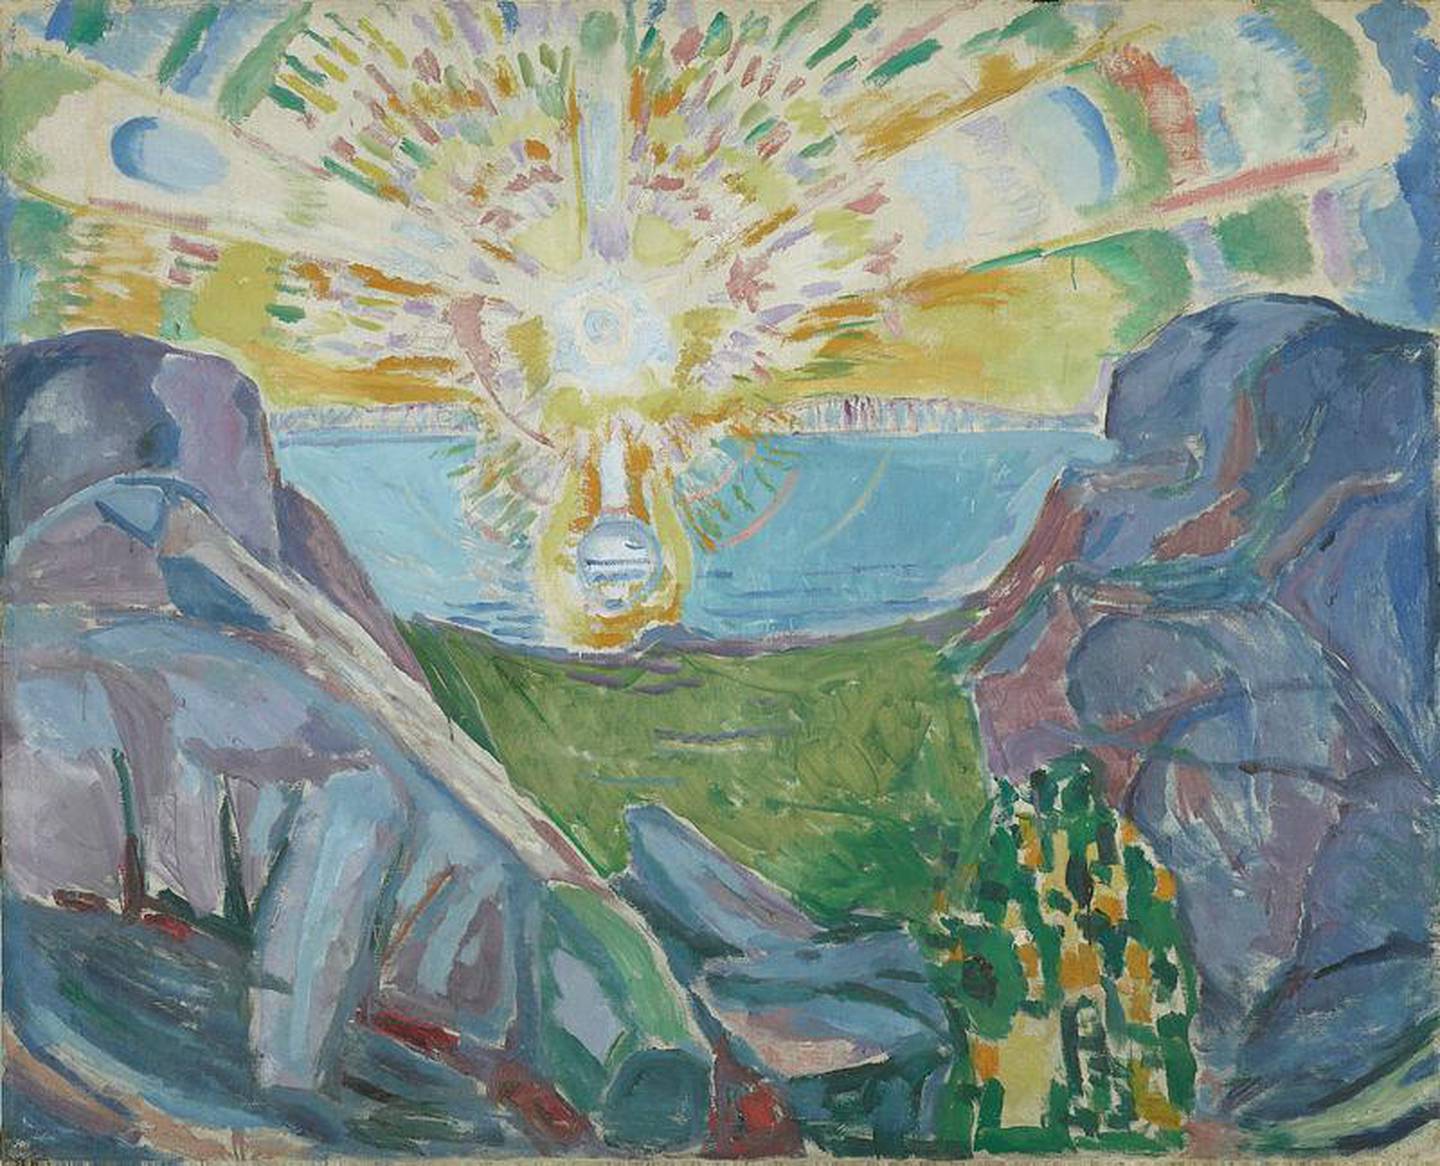 'The Sun' (1910-13) by Edvard Munch. Courtesy of the Munch Museum